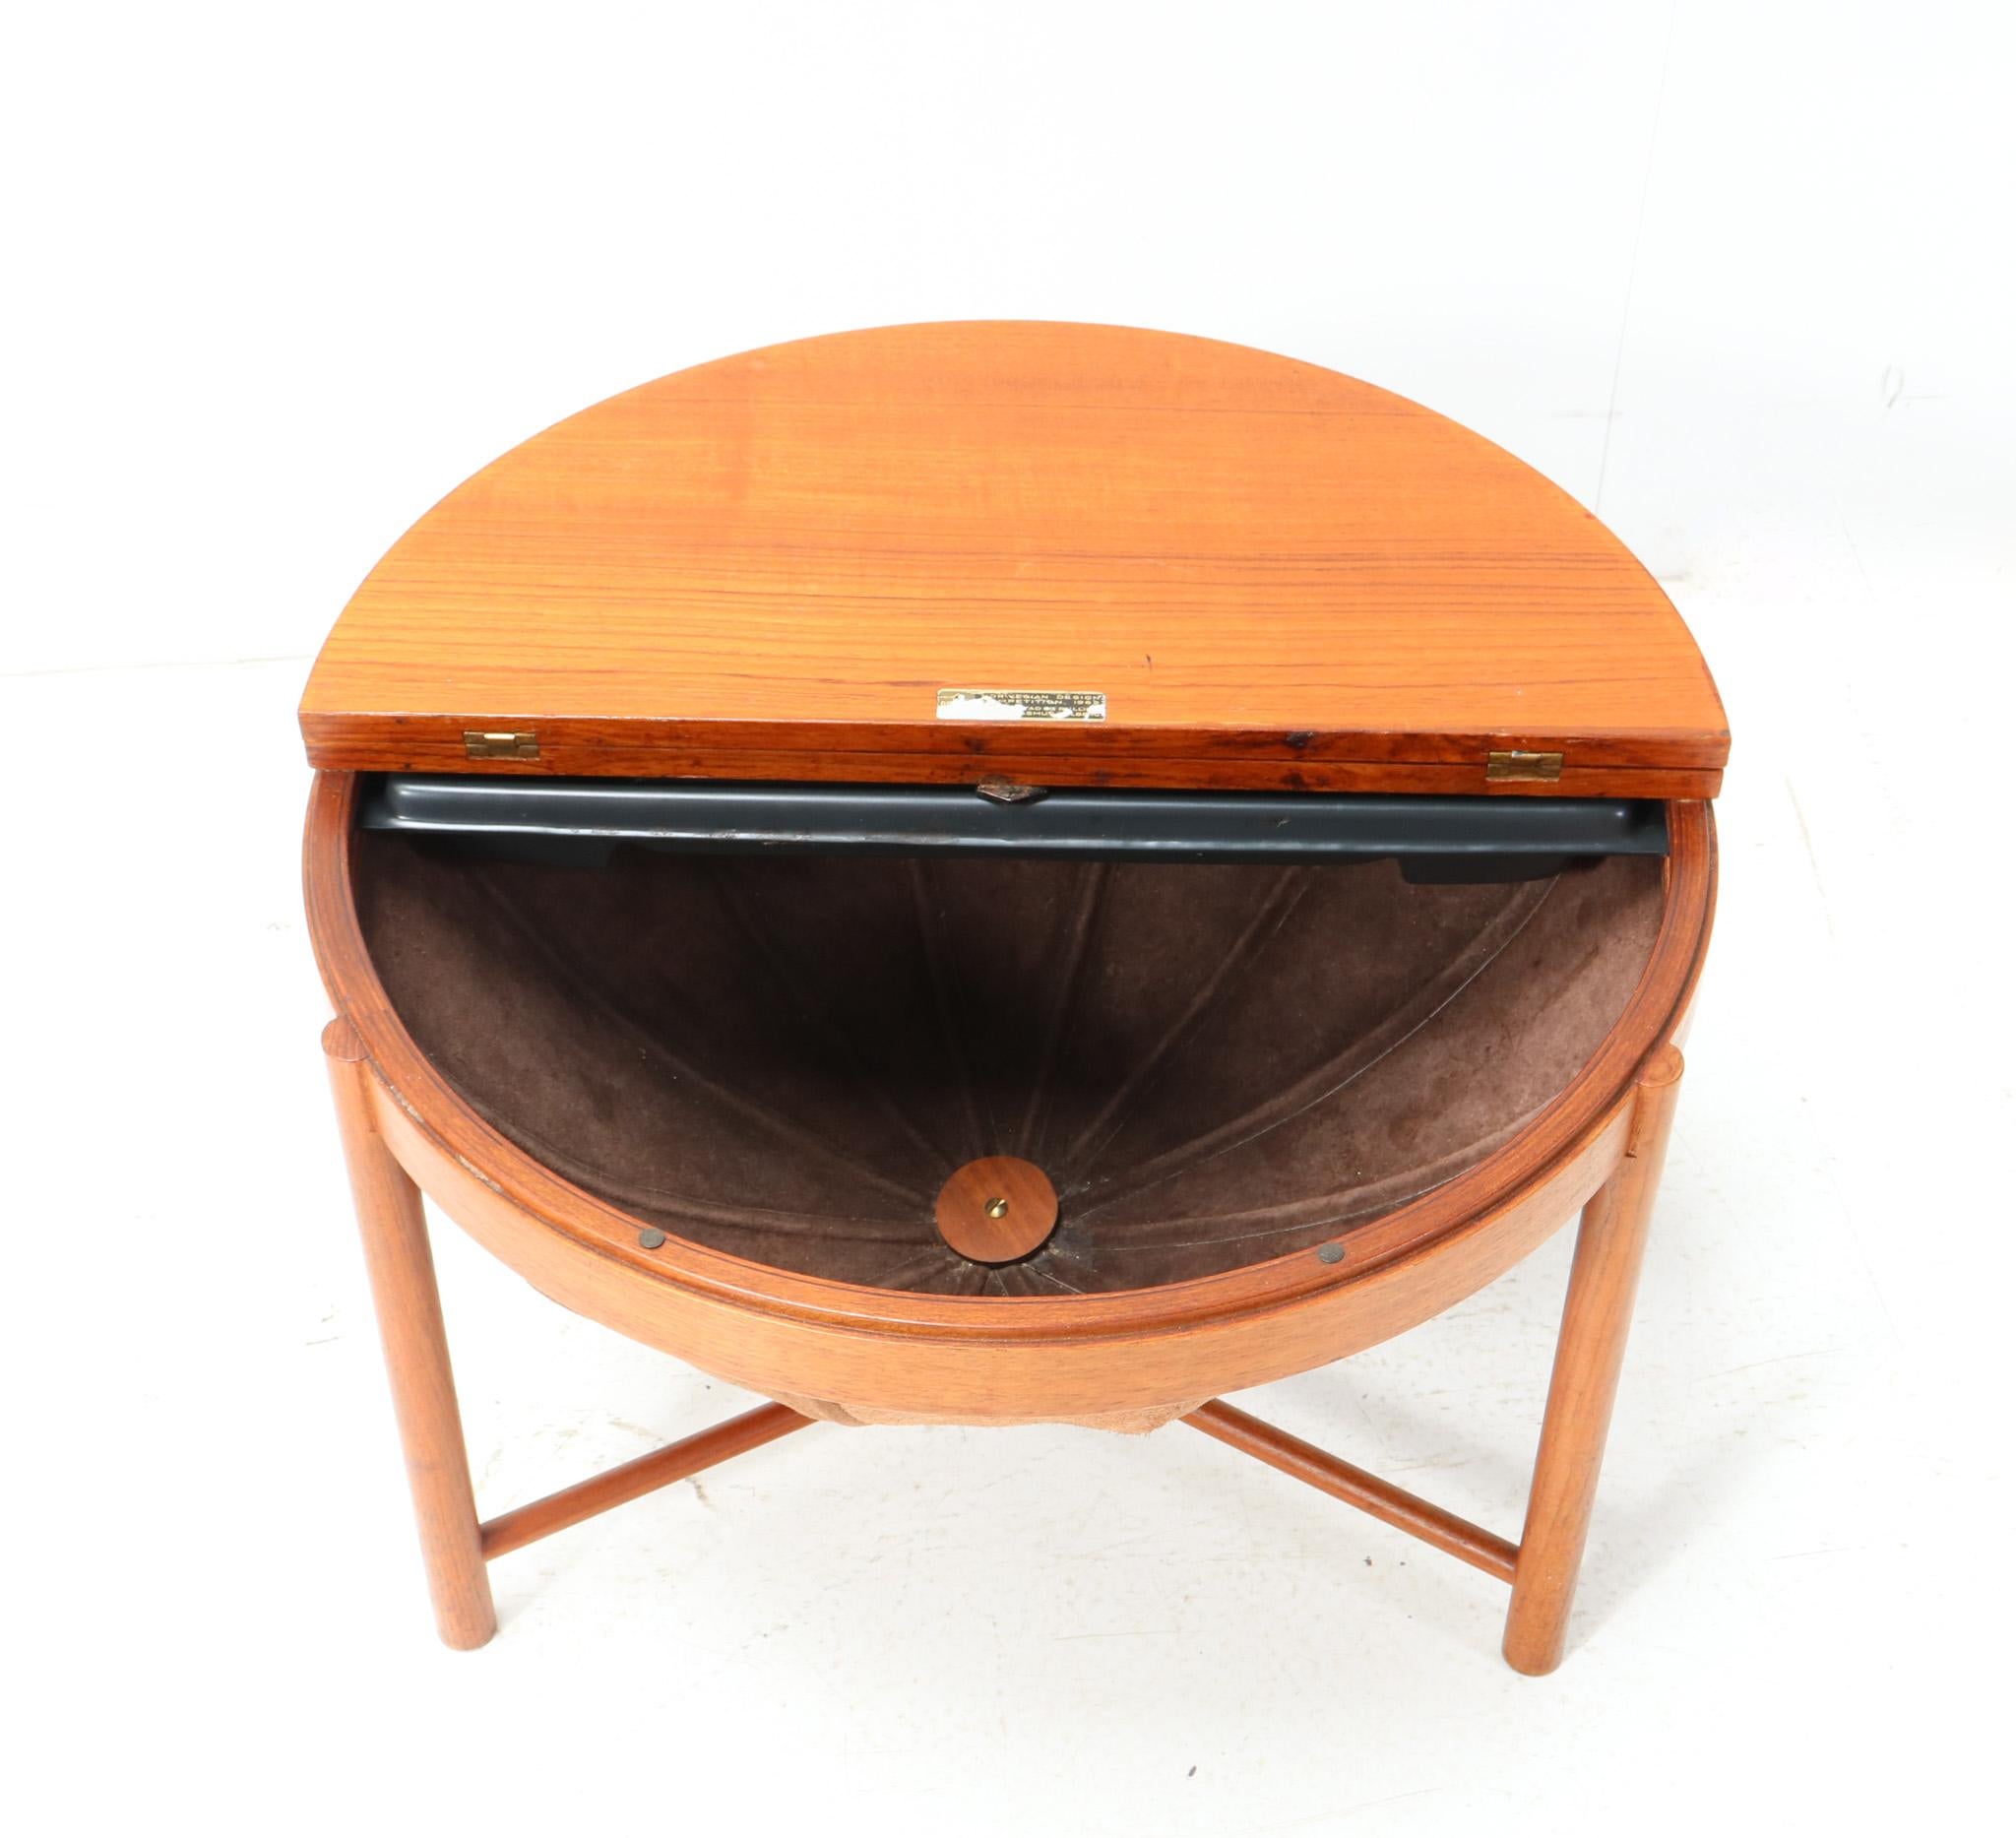  Mid-Century Modern Teak Sewing Table by Rastad & Relling for Rasmus Solberg For Sale 1